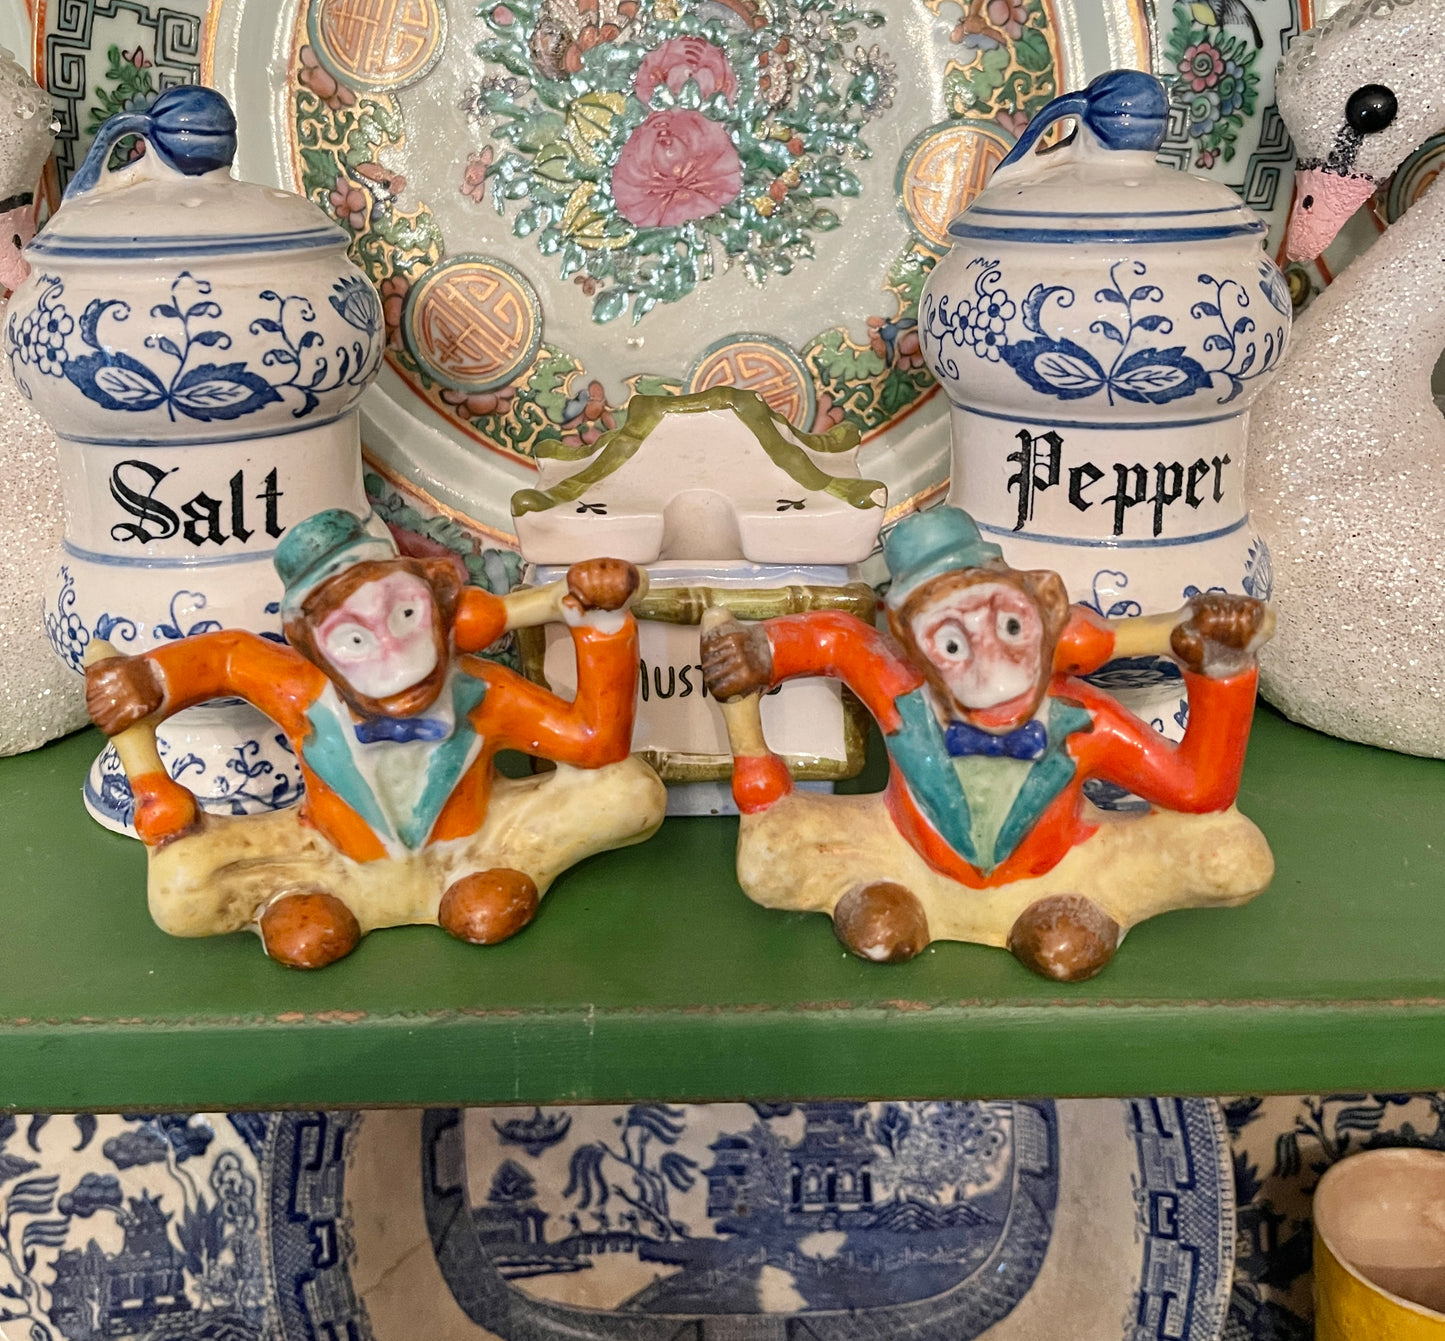 Vintage Monkey Salt and Pepper Shakers, Vibrantly Dressed with Bow Ties and Top Hats, Made in Japan